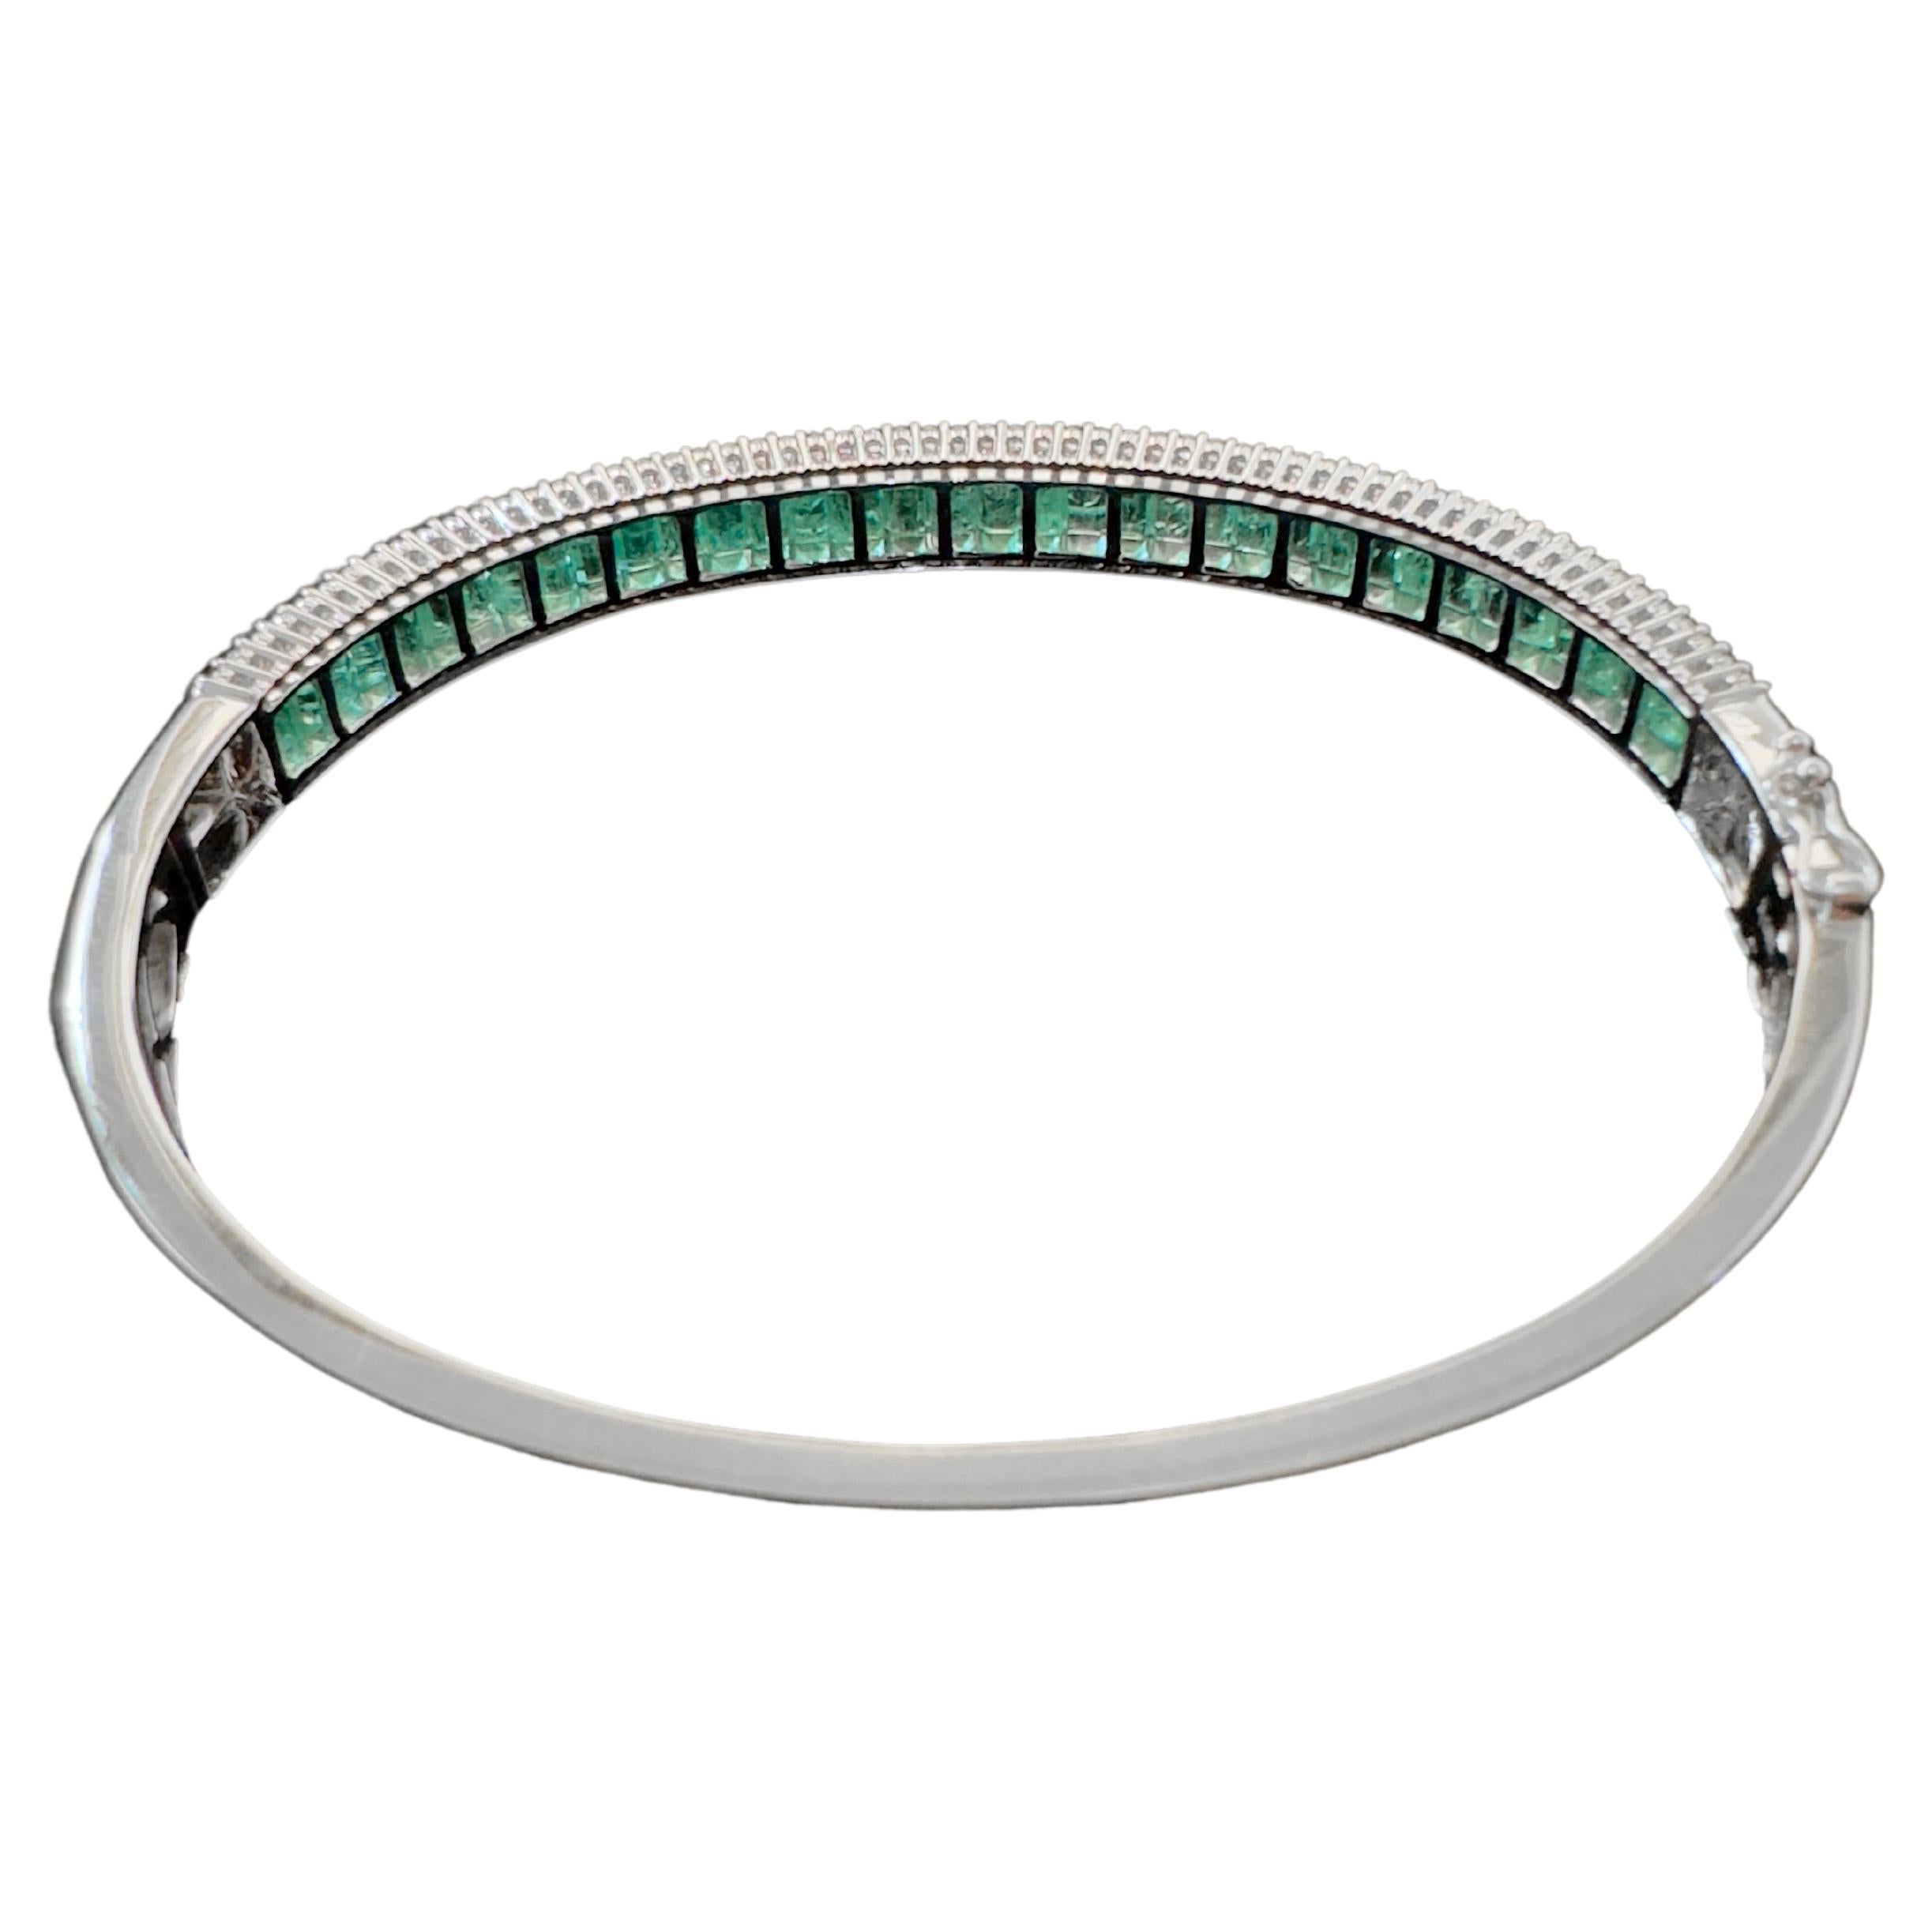 Custom made, this elegant emerald and diamond bangle will be part of your daily stacking arsenal!  The emerald baguettes are carefully channel set while the round brilliant diamonds are prong set on the shoulders to protect the emeralds.  The bangle